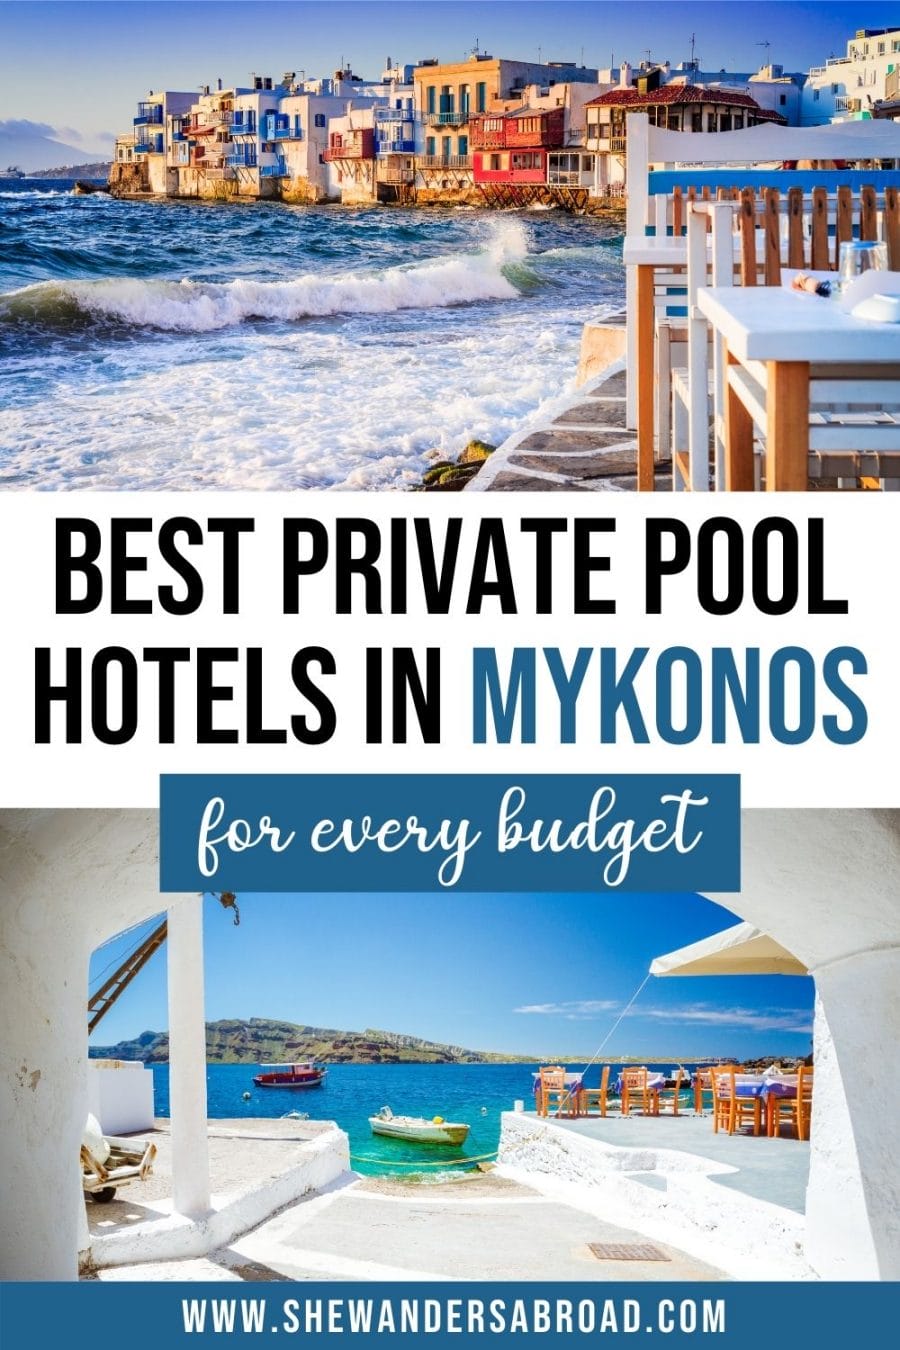 15 Stunning Hotels in Mykonos with Private Pool